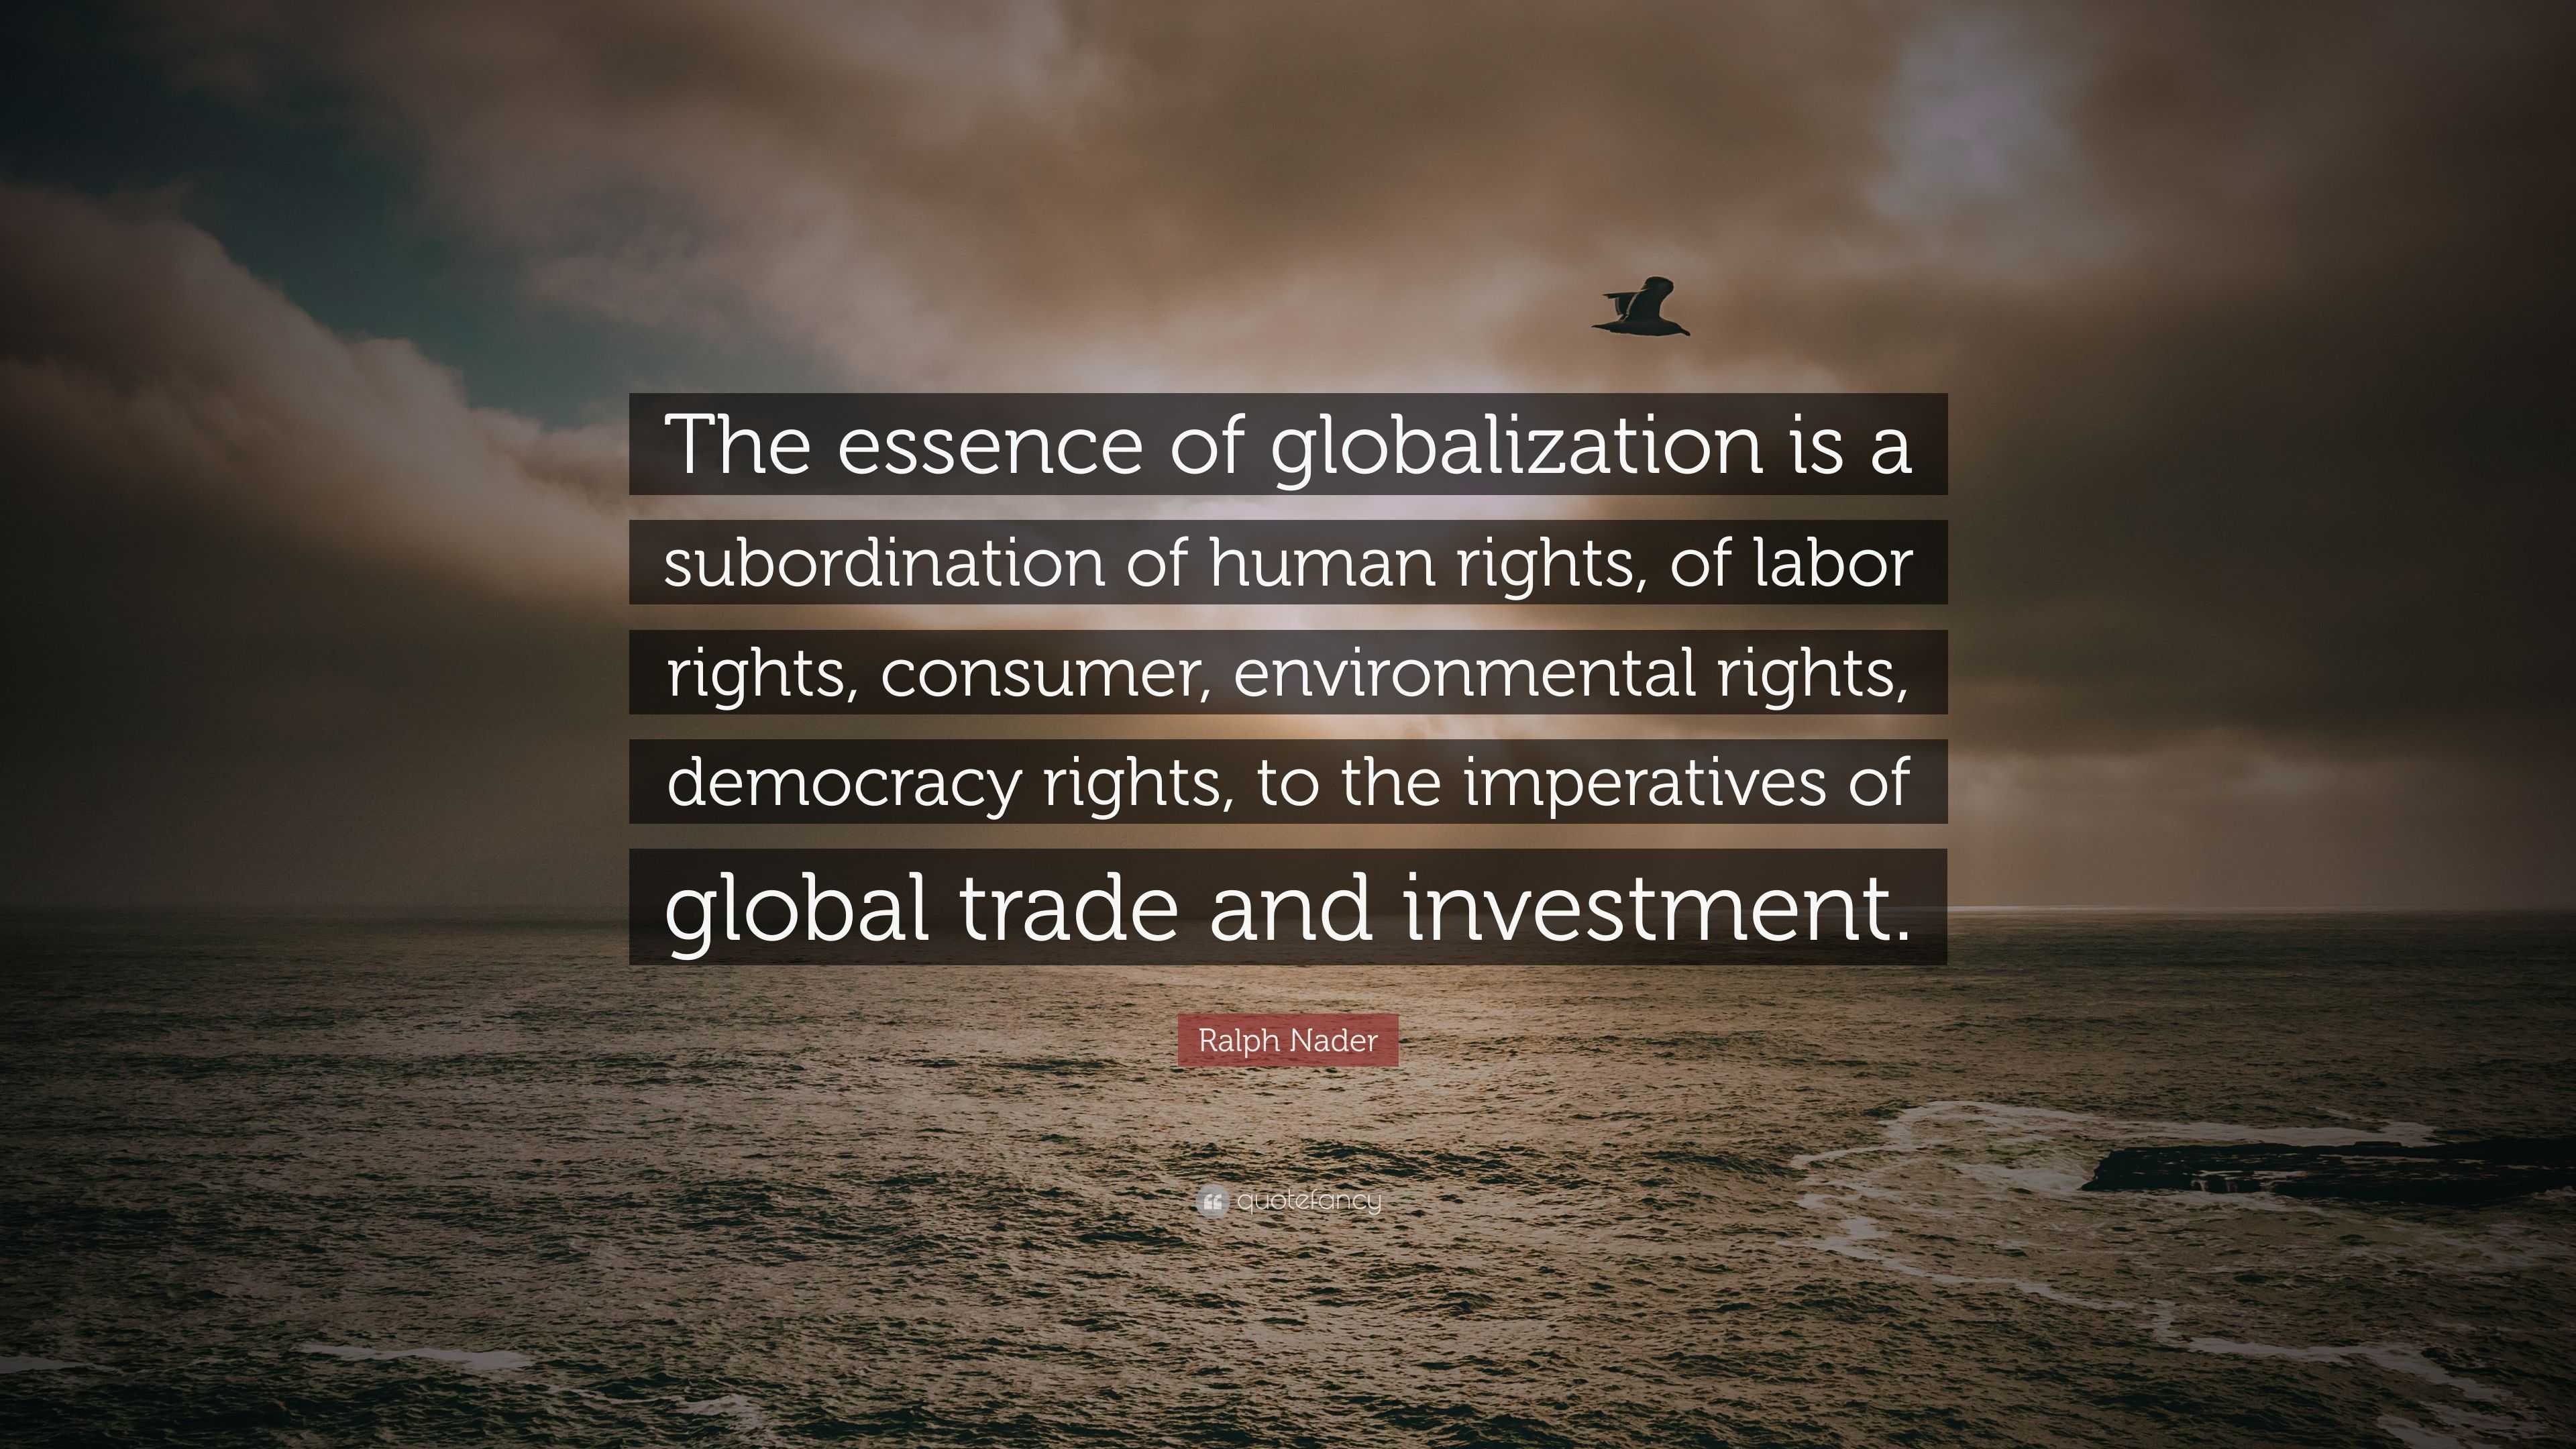 Ralph Nader Quote “The essence of globalization is a